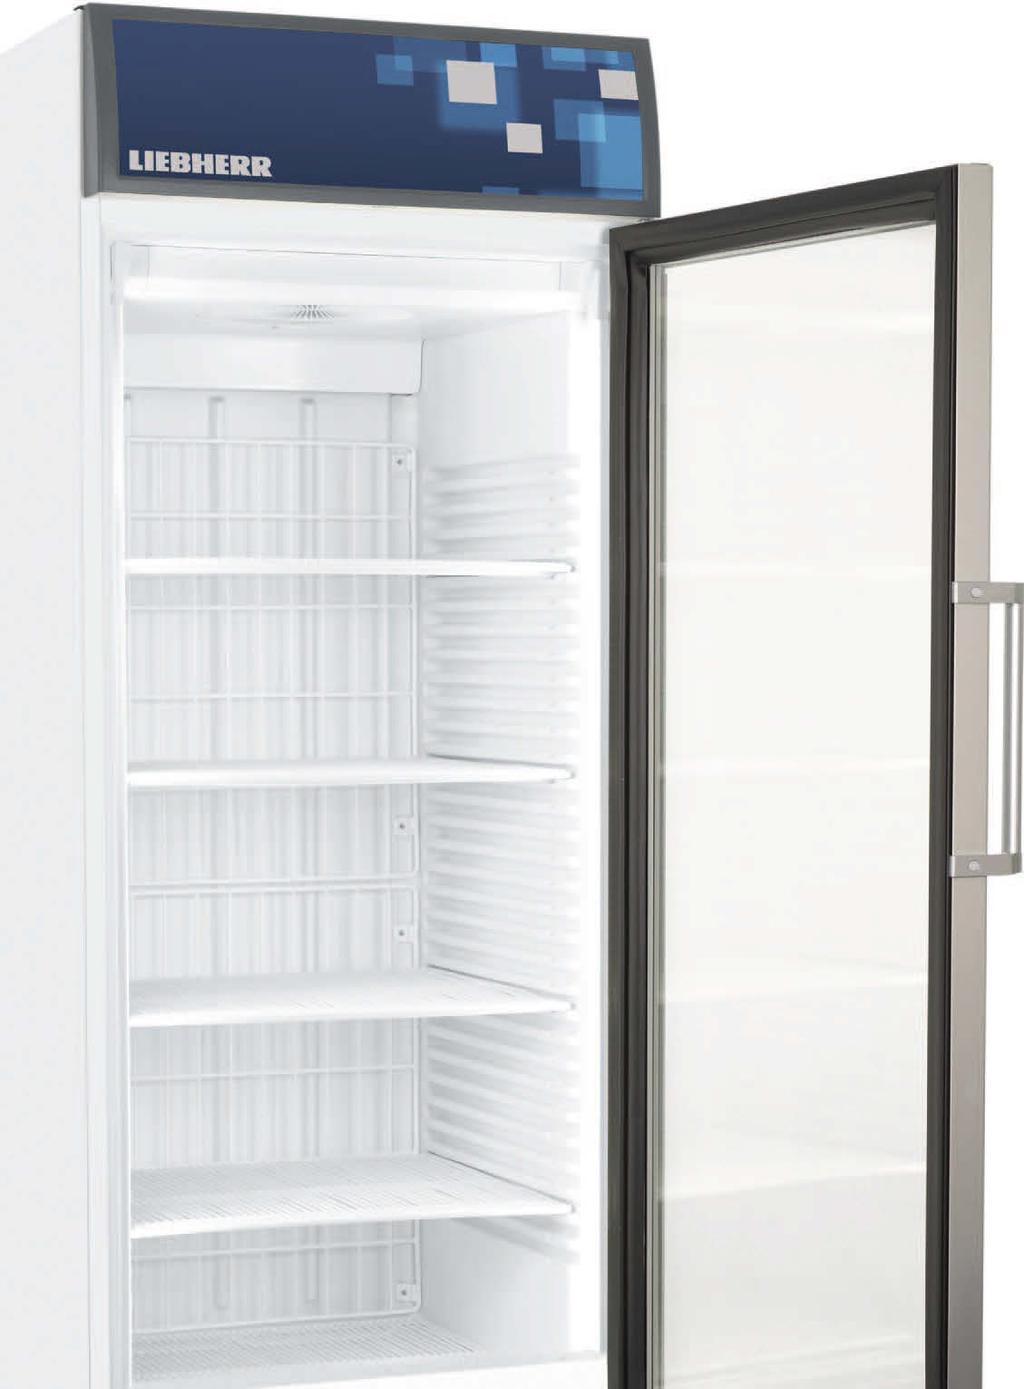 Contents Increase awareness of your brand 6 Chest freezers 8 Forced-air display